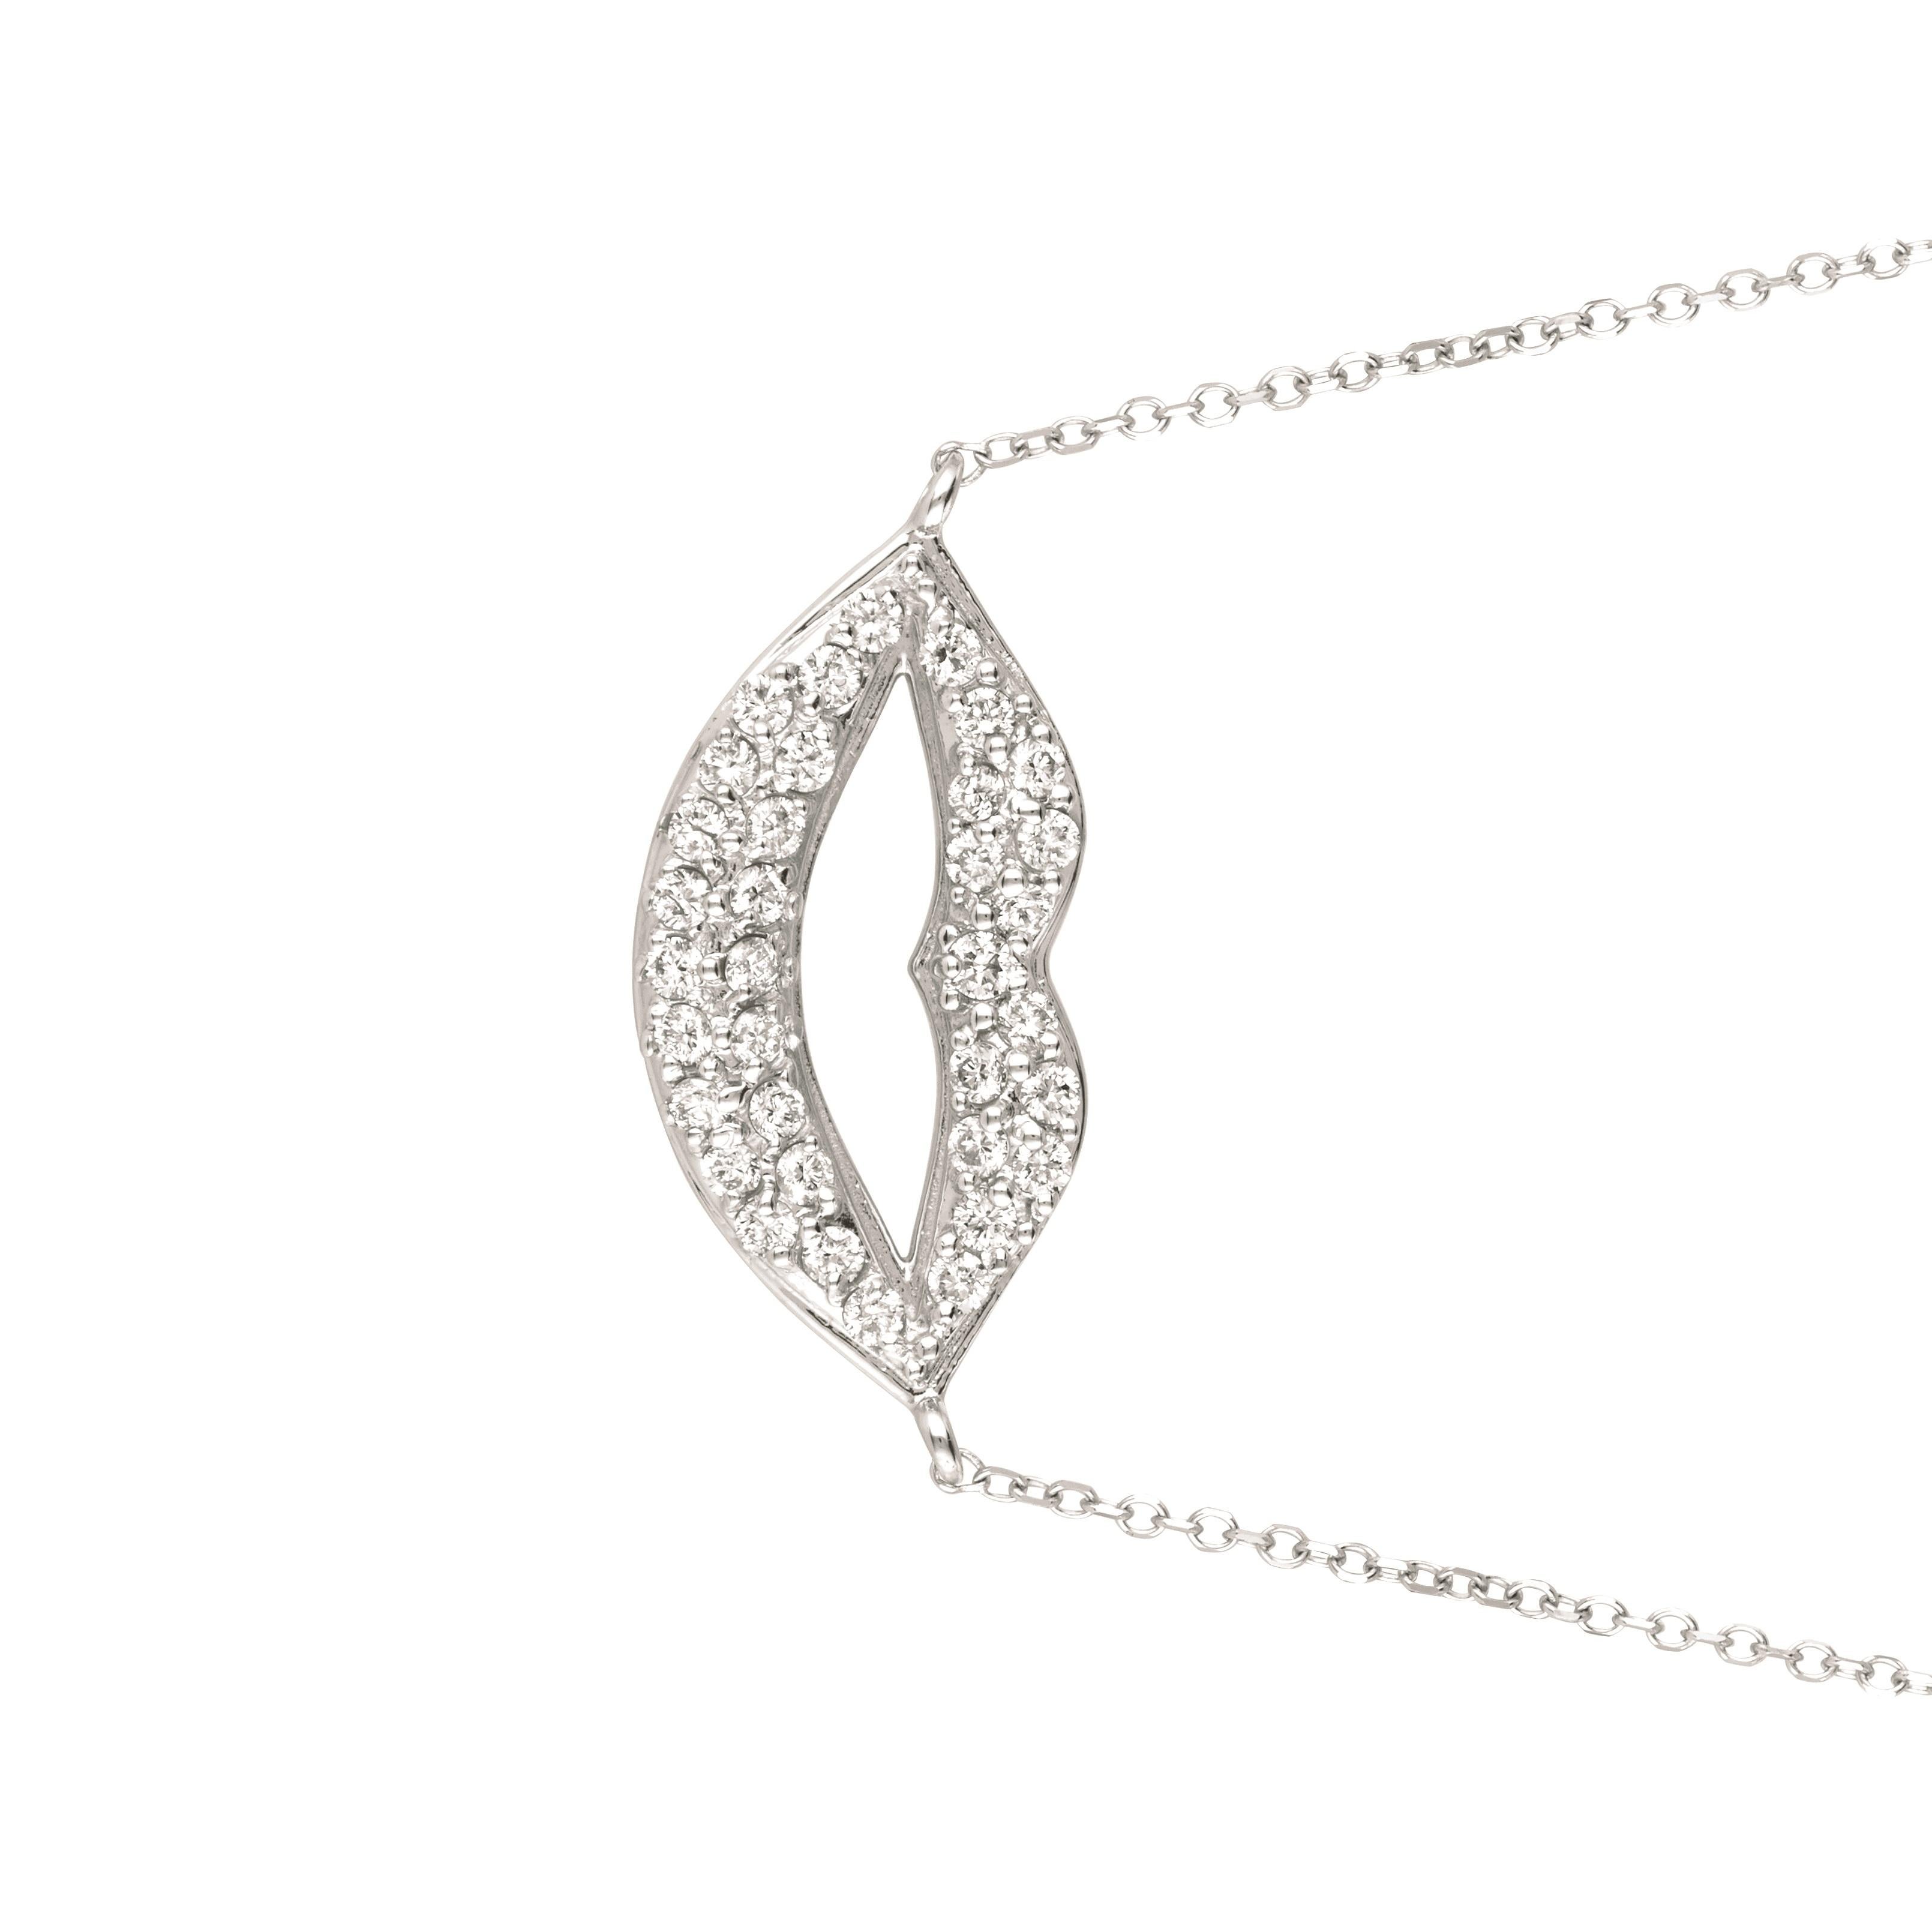 0.35 Carat Natural Diamond Lips Necklace 14K White Gold G SI 18 inches chain

100% Natural Diamonds, Not Enhanced in any way Round Cut Diamond Necklace
0.35CT
G-H
SI
3/8 inch in height, 7/8 inch in width
14K White Gold, Pave style, 2.3 grams
35